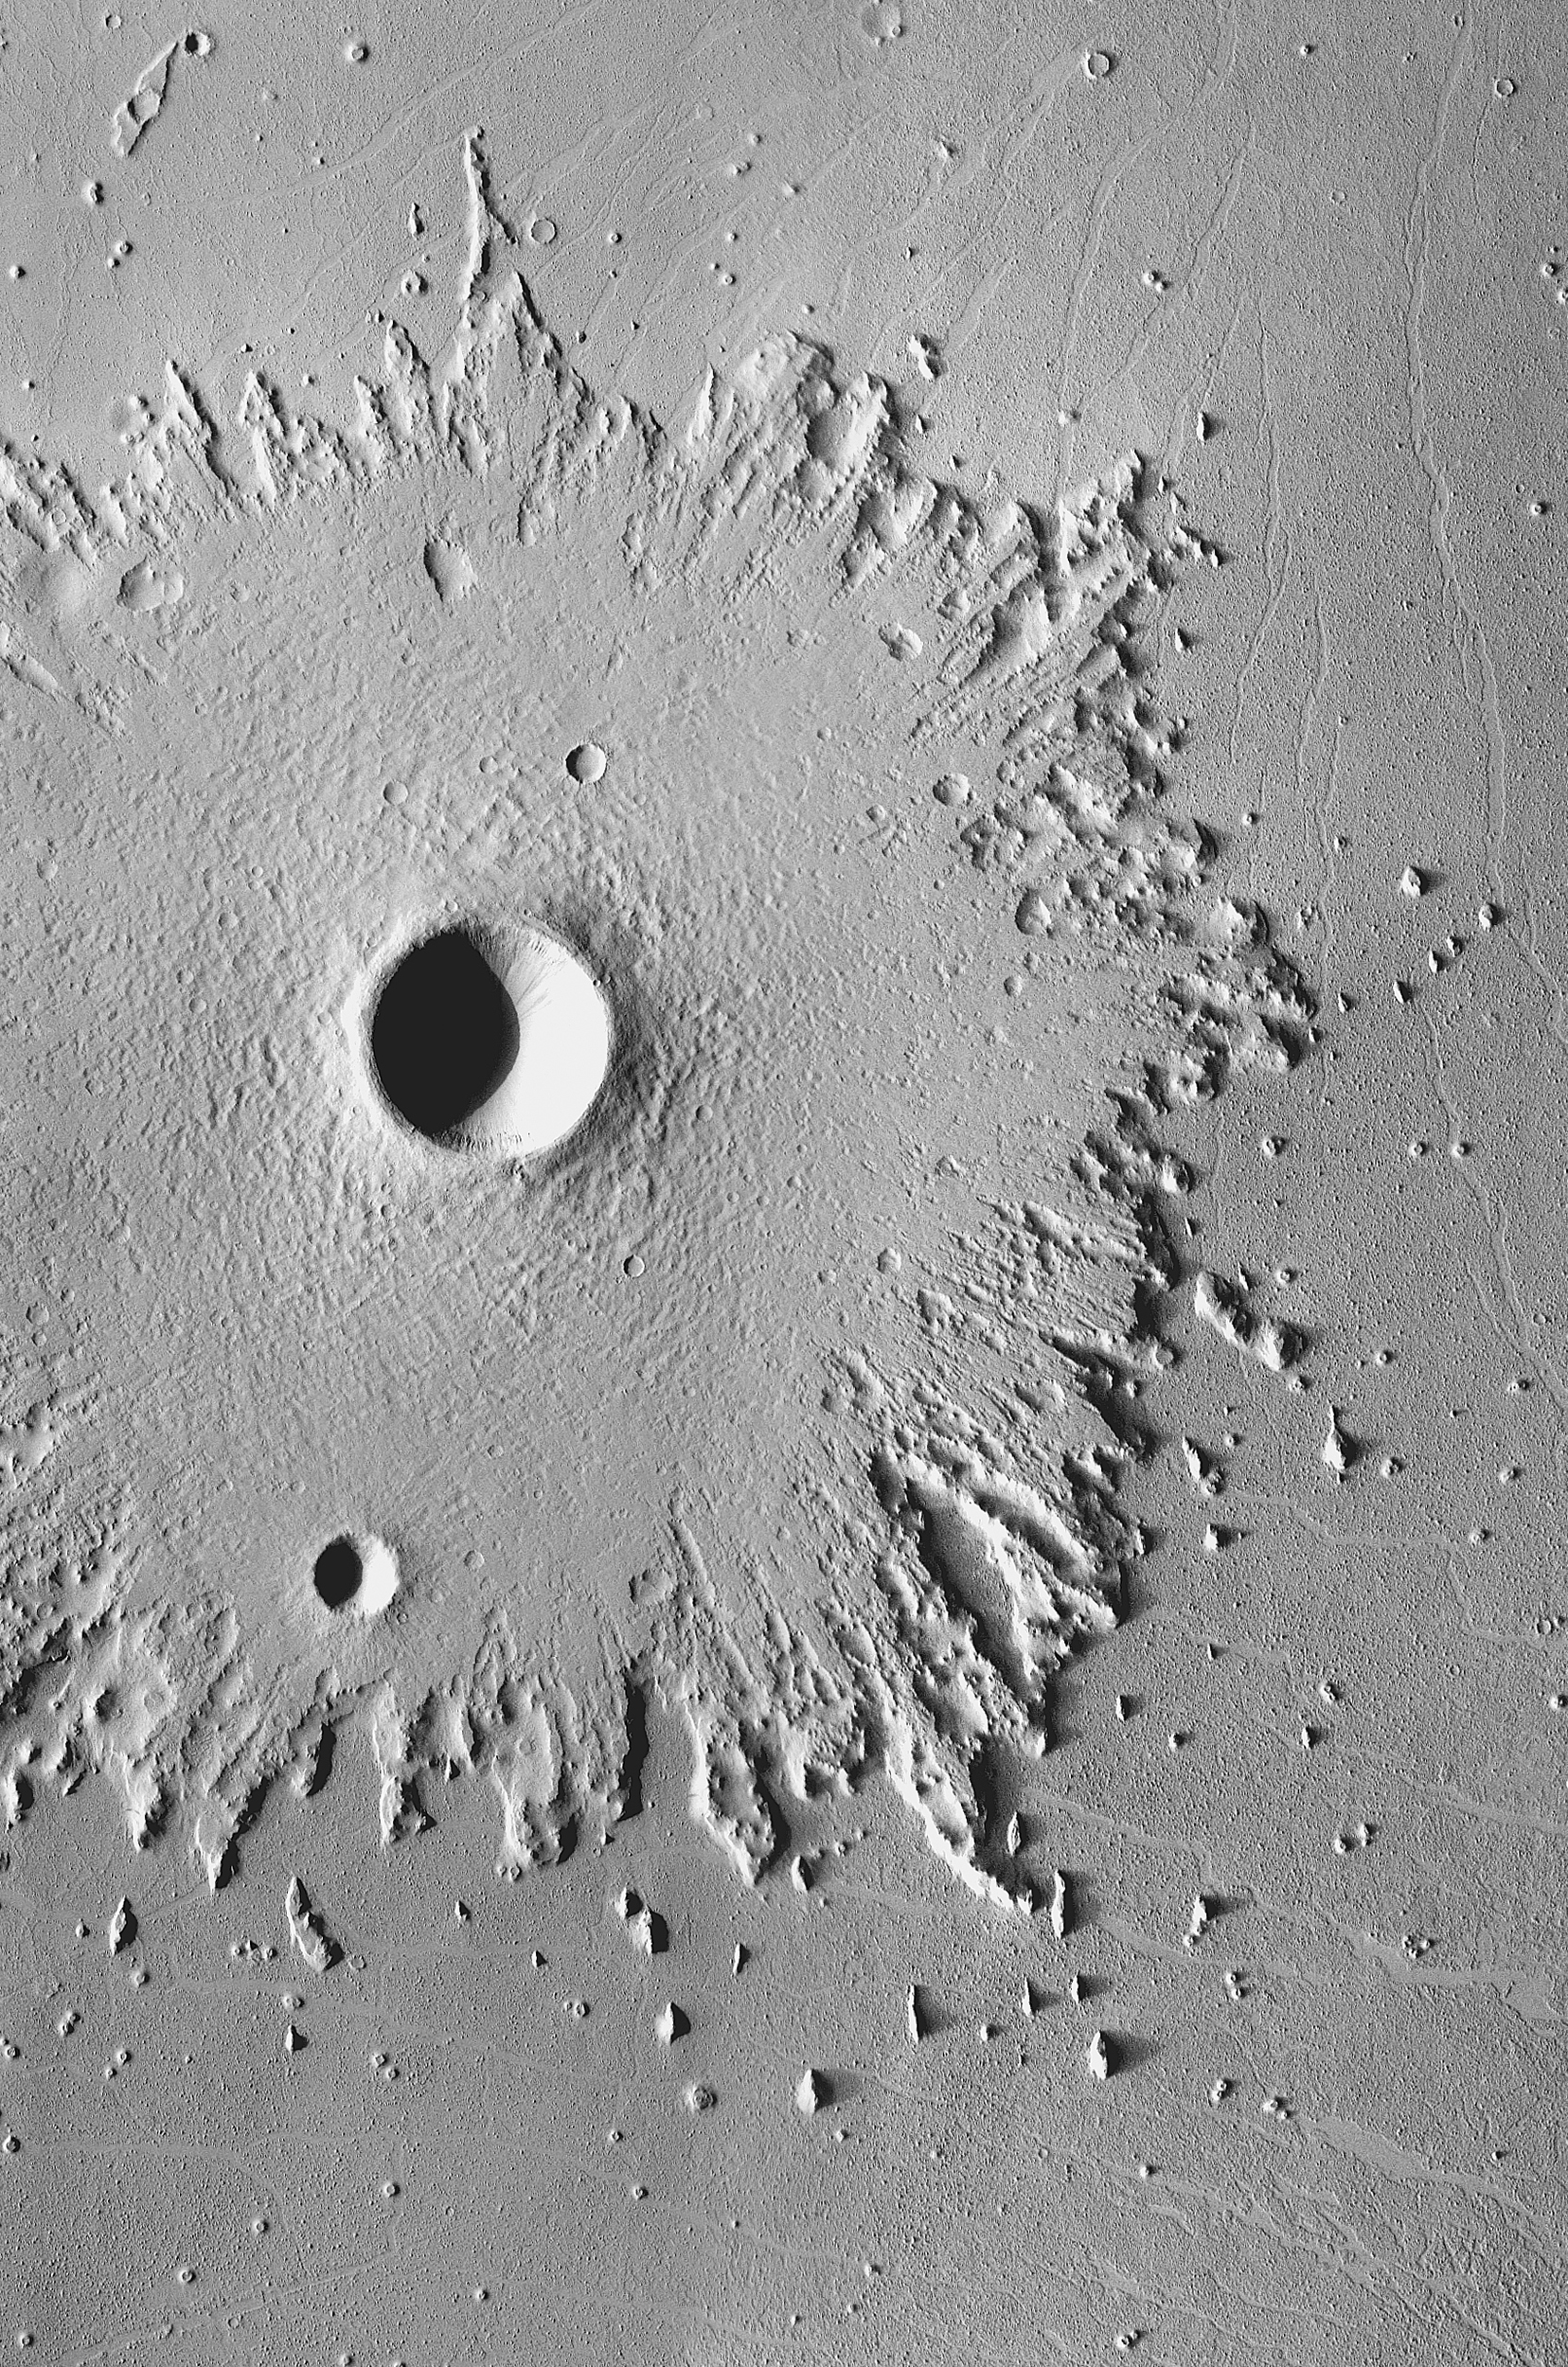 Radical Erosion: The wide, circular blanket of ejected debris surrounding this crater has become greatly eroded by the wind, which has stripped its surface features. This images was acquired between May 2003 and April 2006 by the Thermal Emission Imaging System instrument on NASA's Mars Odyssey orbiter.